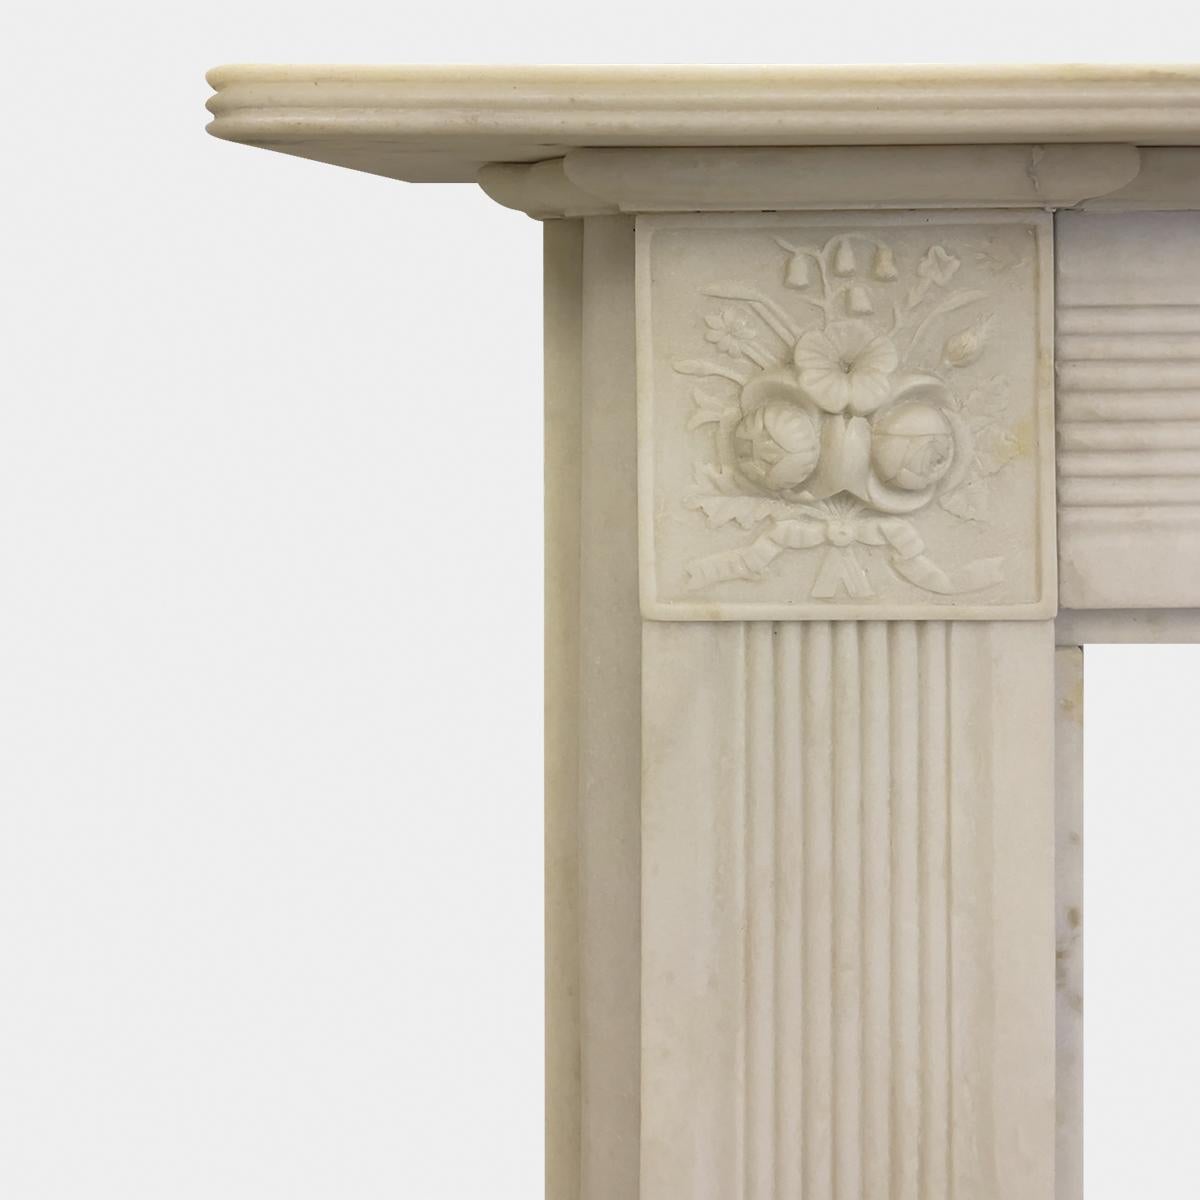 A reclaimed Regency style fireplace in lightly distressed or antiqued white Aegean marble. With reeded panels to the jambs surmounted by carved foliate corner blocks. The frieze also reeded beneath a generous reeded shelf. Carved well and in good